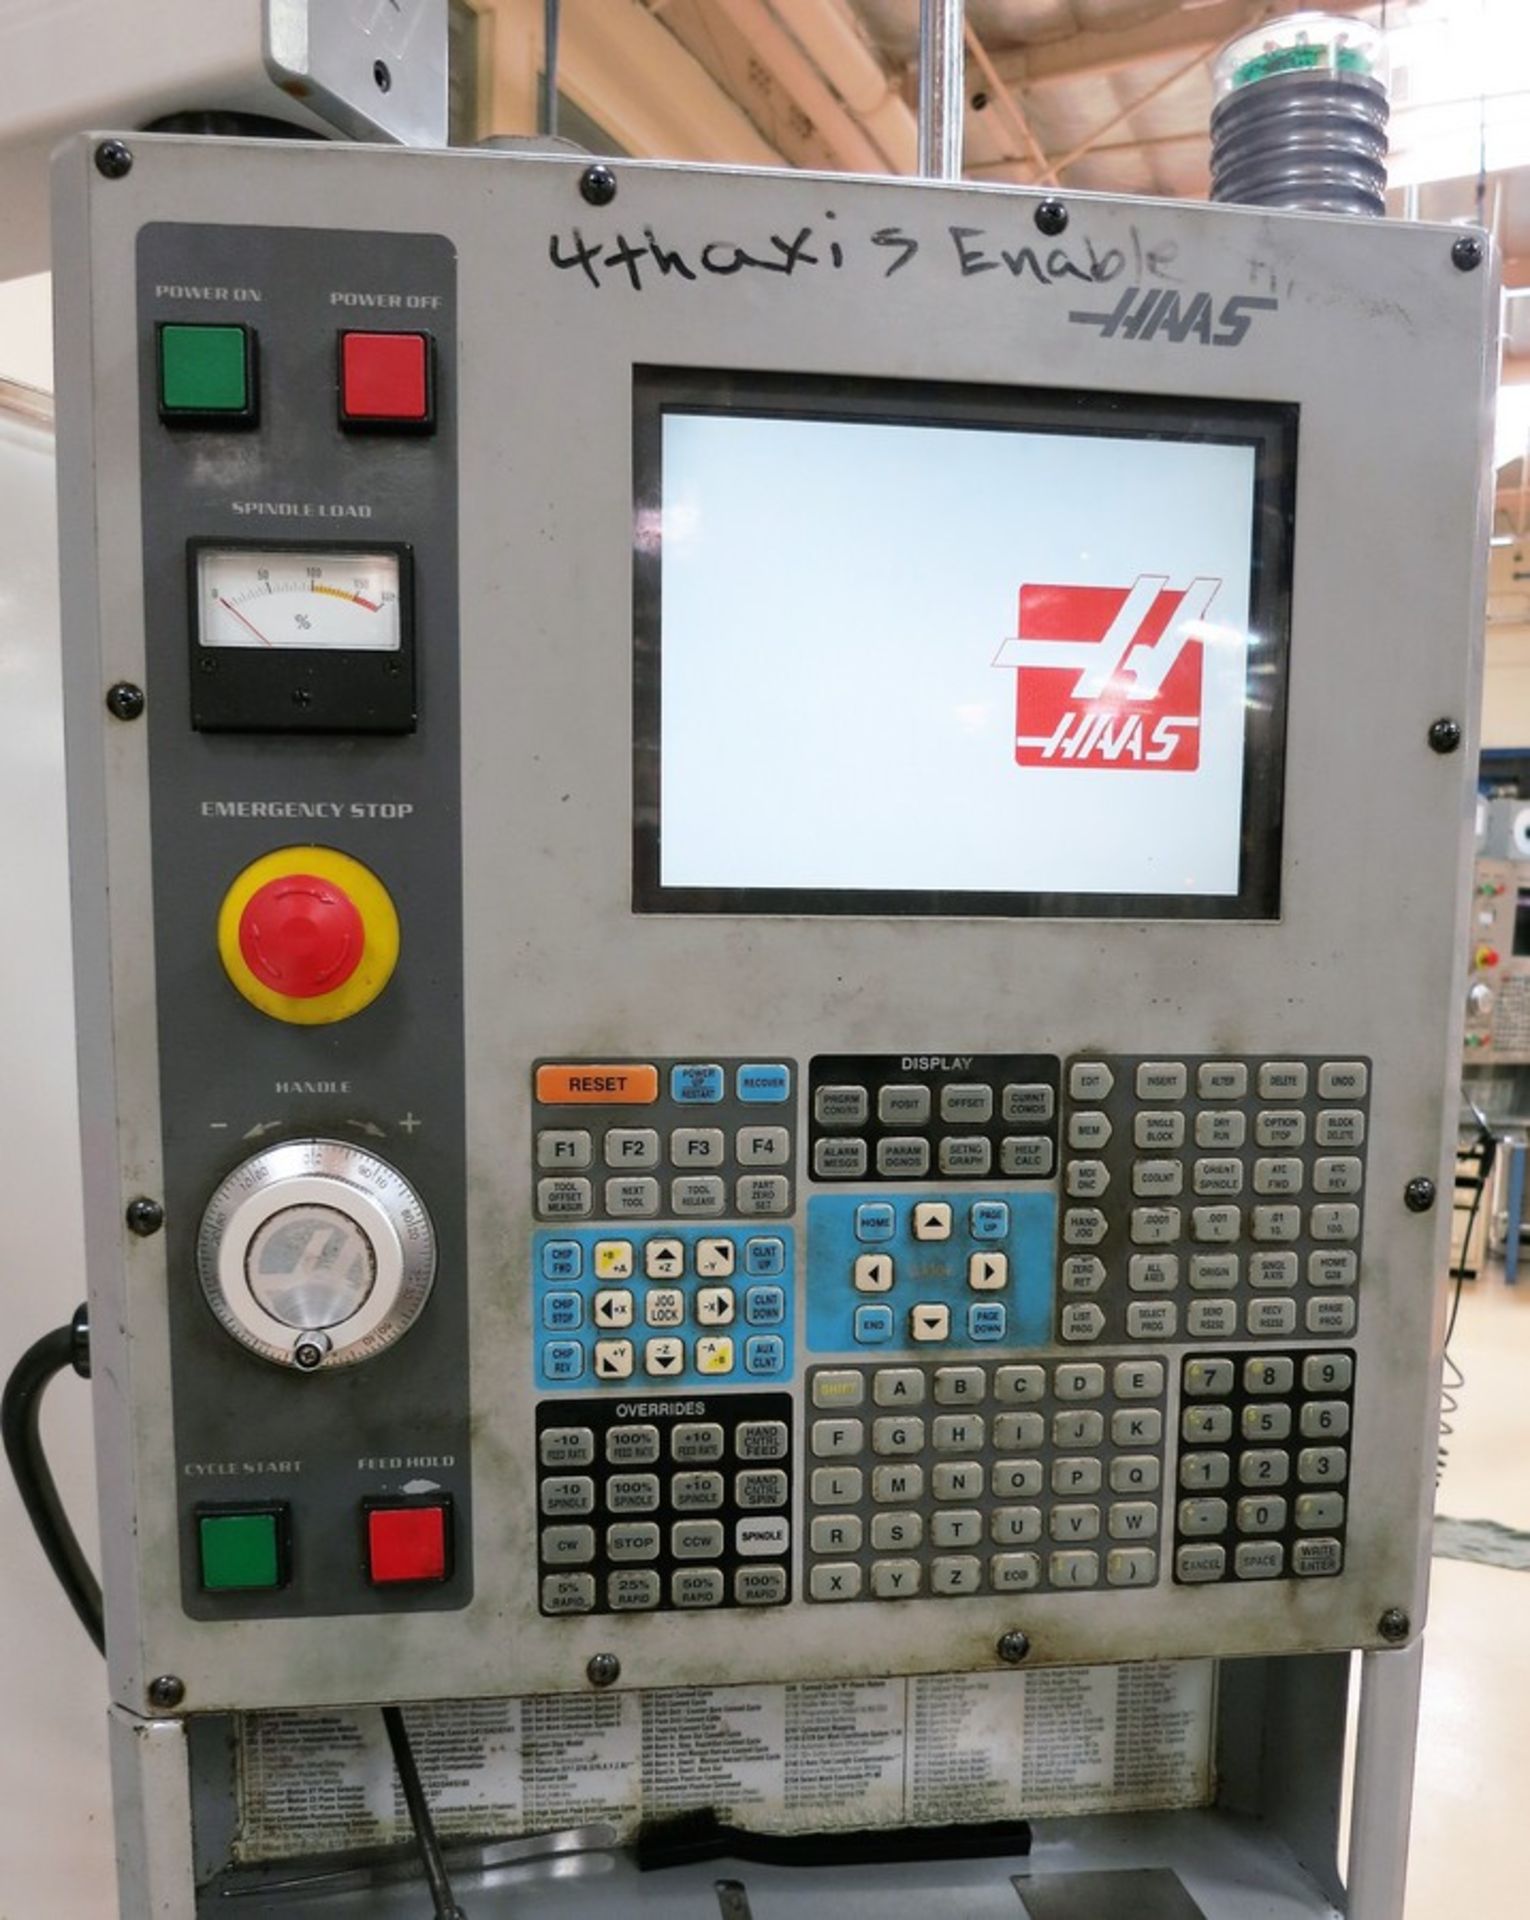 HAAS MINIMILL 4-AXIS CNC VERTICALMACHINING CENTER, S/N 40310, NEW 2005 - Image 2 of 10